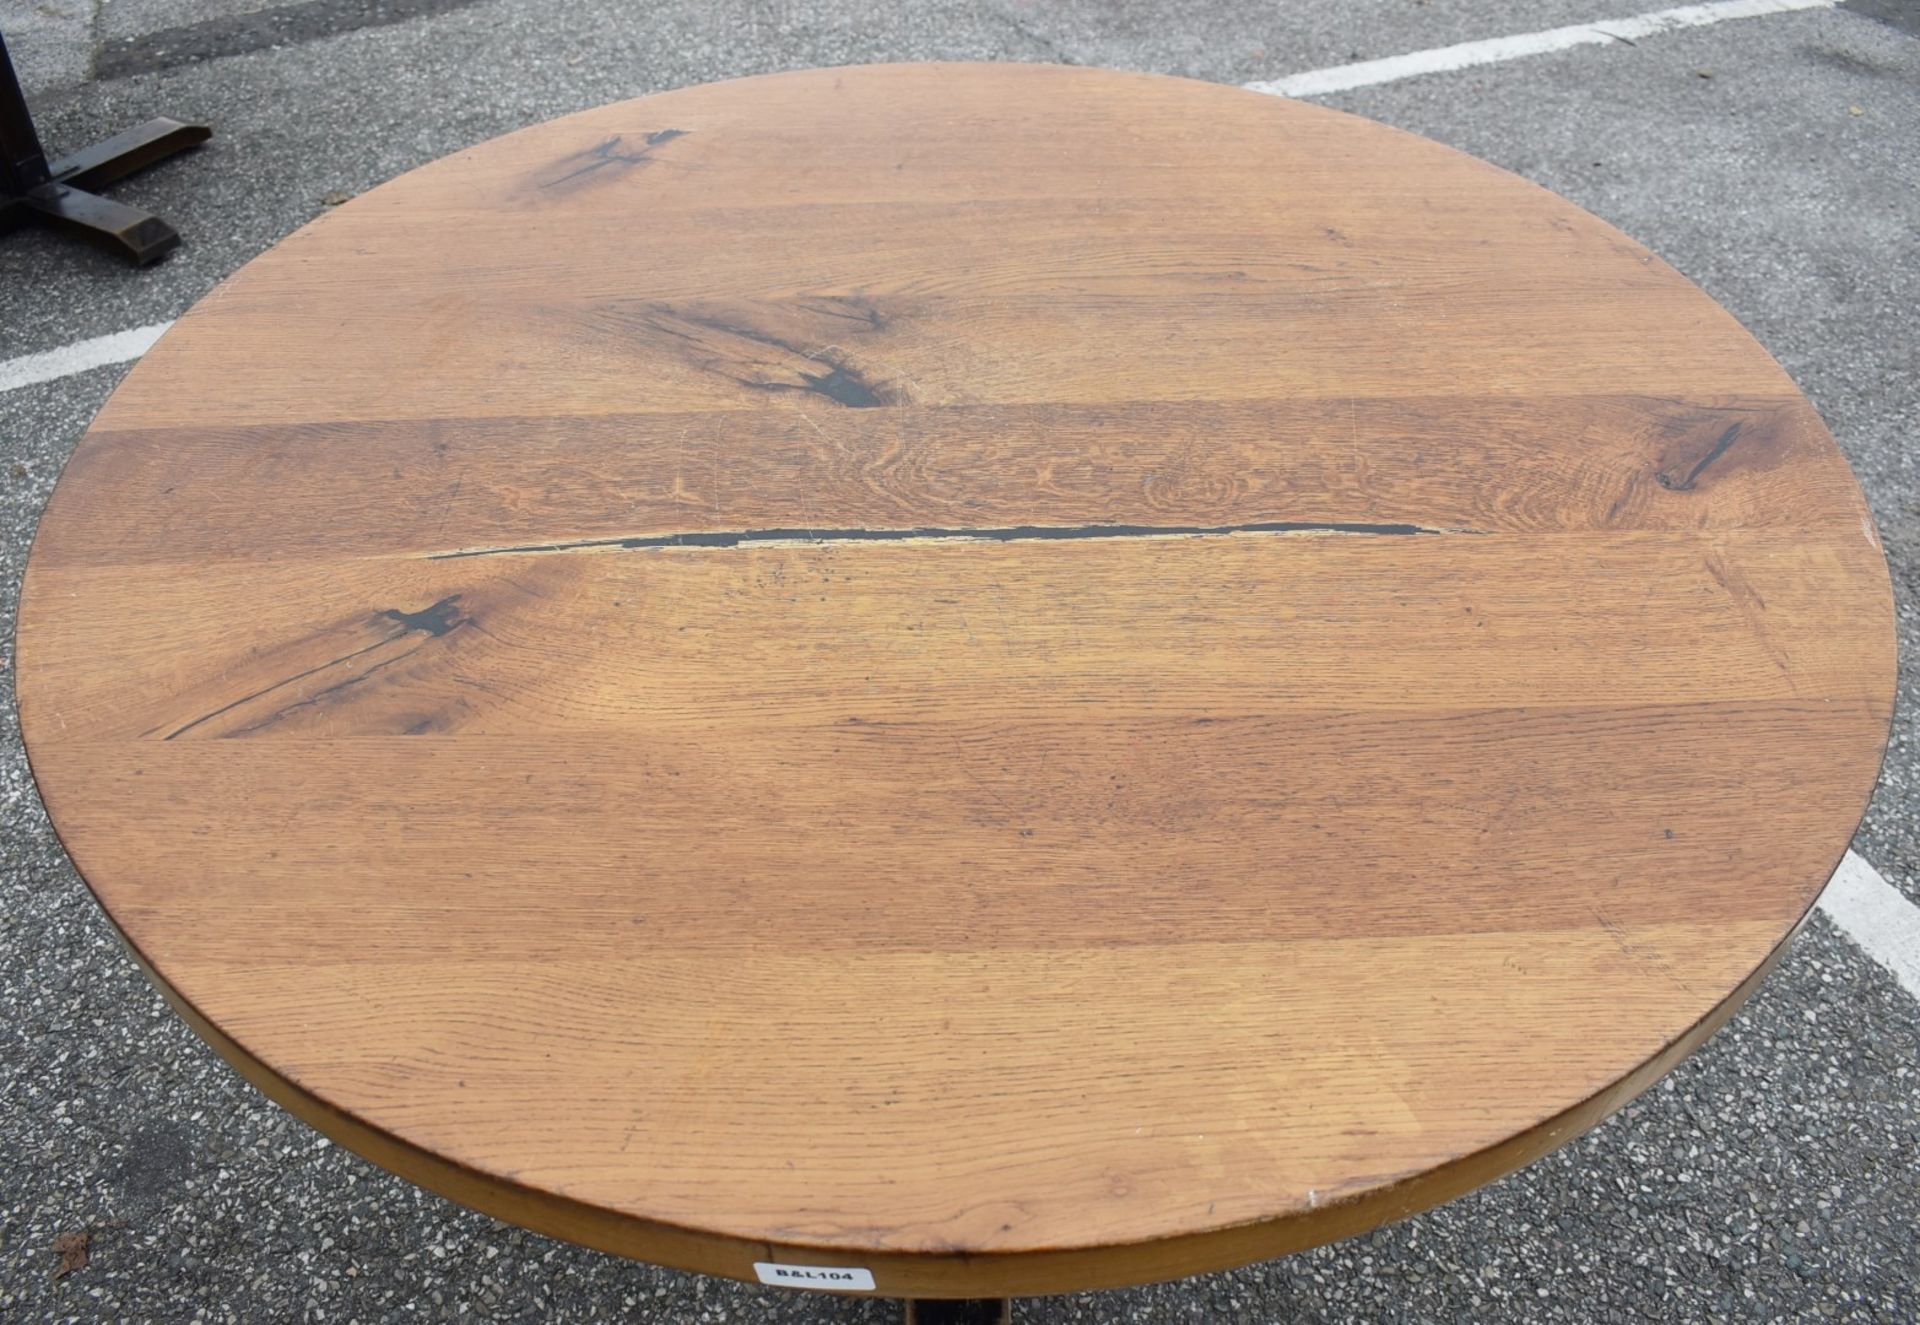 1 x Solid Oak 120cm Round Restaurant Table - Natural Rustic Knotty Oak Tops With Rustic Timber Base - Image 2 of 5